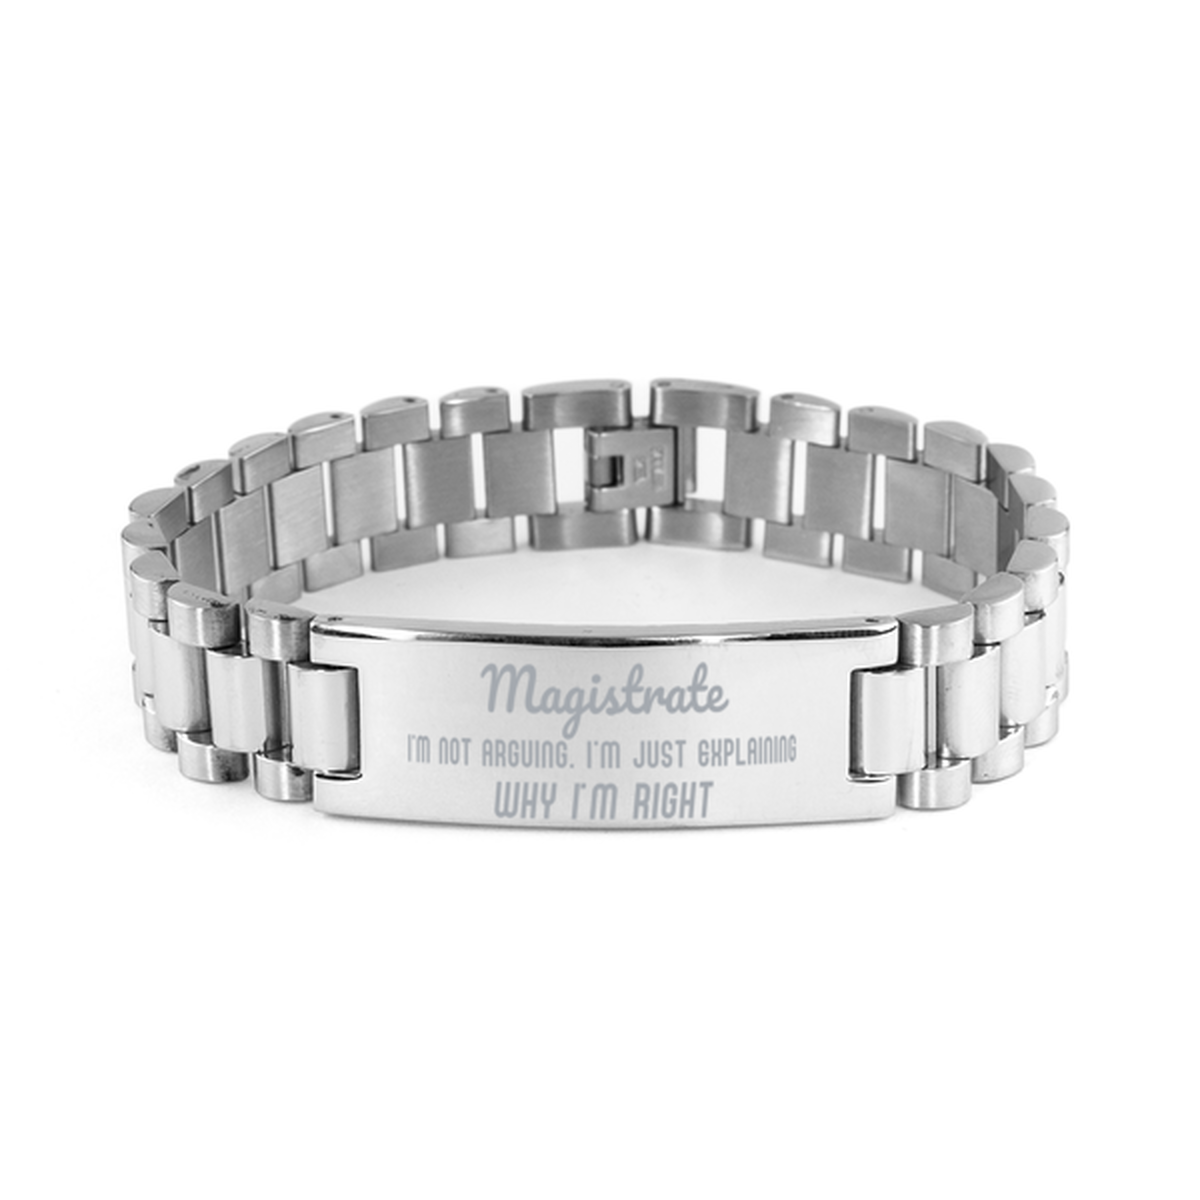 Magistrate I'm not Arguing. I'm Just Explaining Why I'm RIGHT Ladder Stainless Steel Bracelet, Graduation Birthday Christmas Magistrate Gifts For Magistrate Funny Saying Quote Present for Men Women Coworker